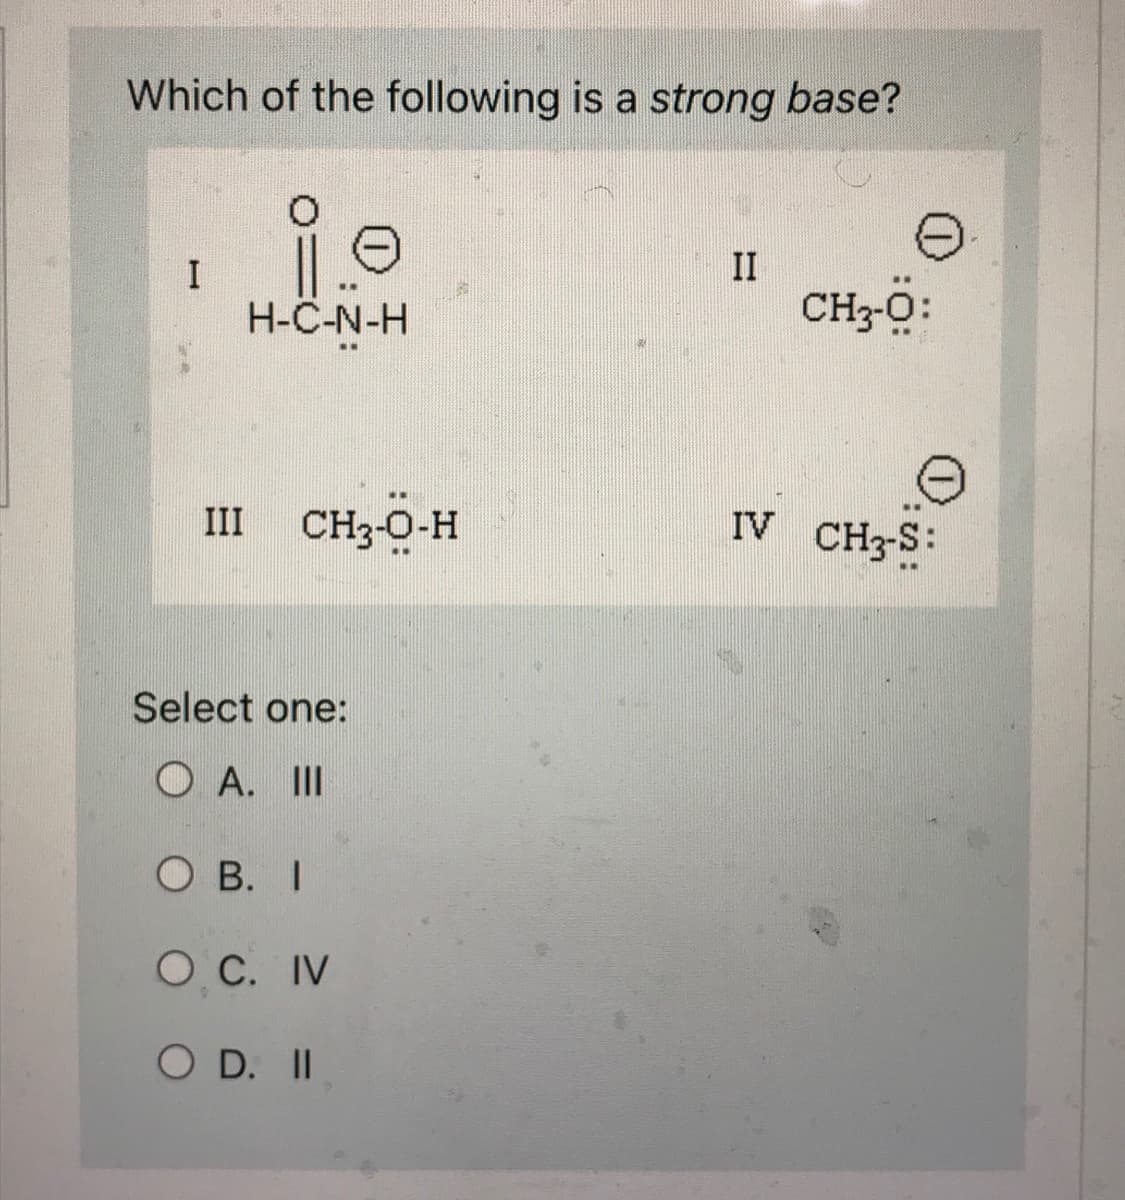 Which of the following is a strong base?
i.e
H-C-N-H
III CH₂-O-H
Select one:
OA. III
OB. I
O. C. IV
O D. II
II
CH3-Ö:
IV CH3-S: